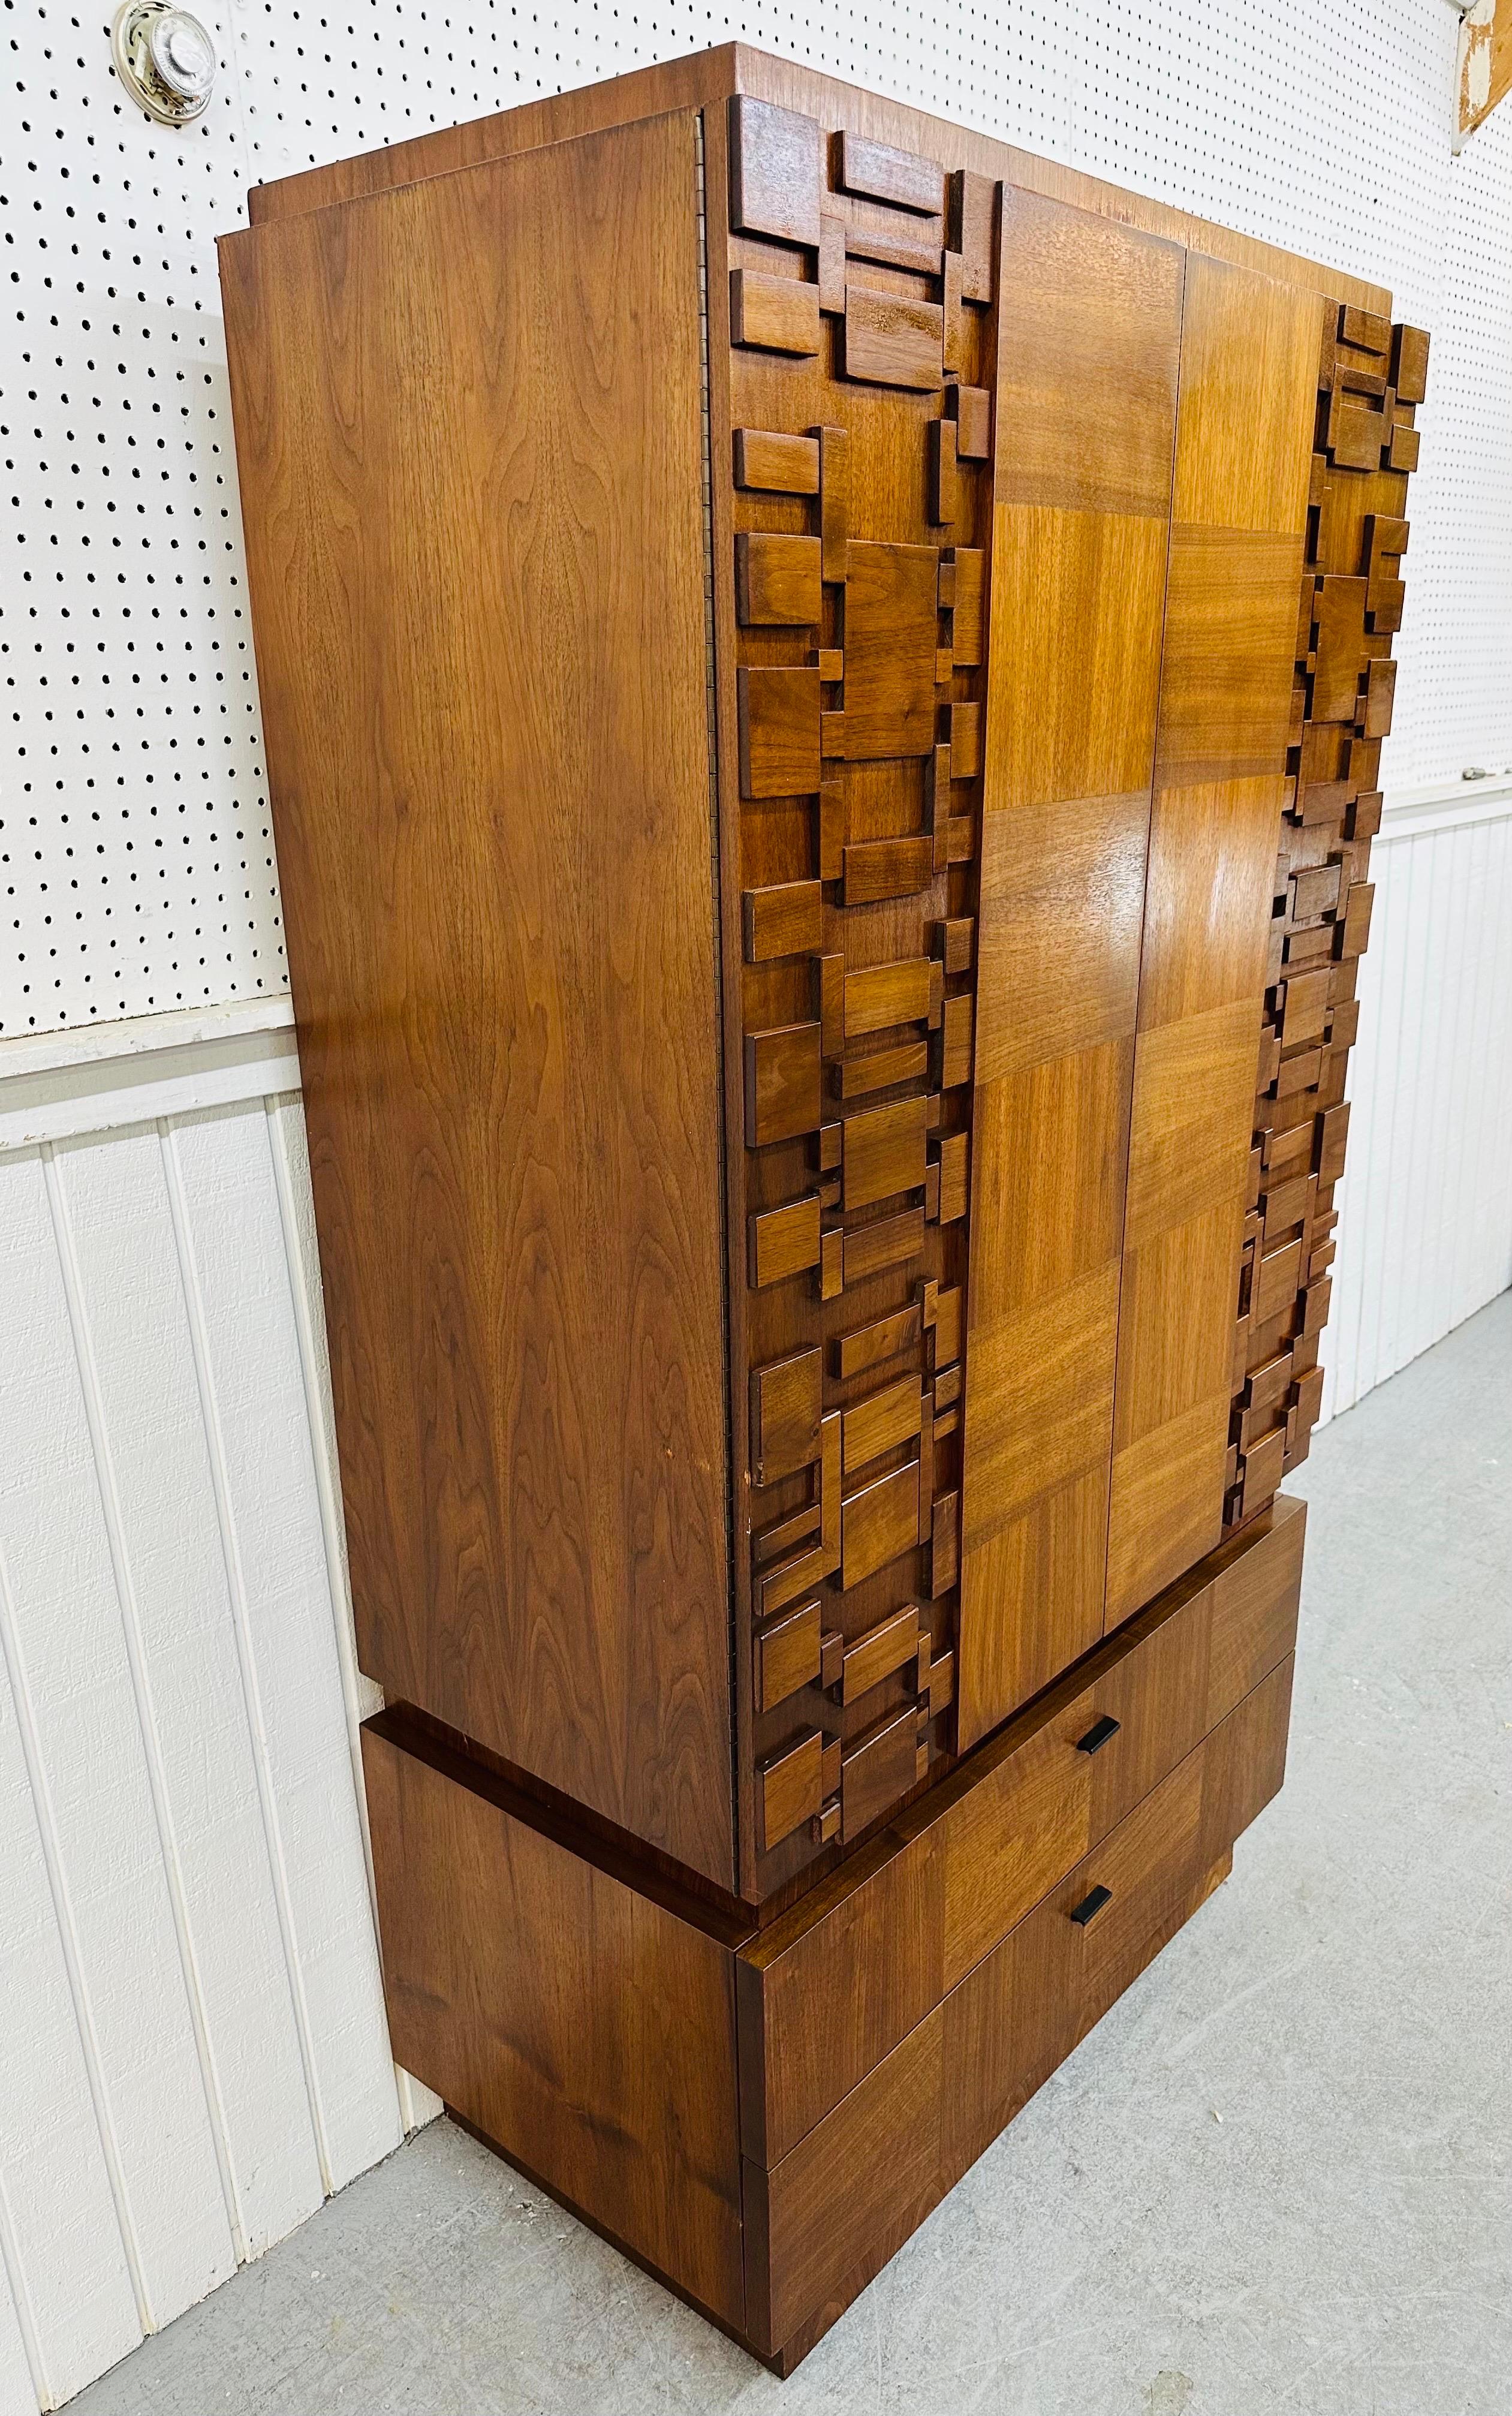 This listing is for a Mid-Century Modern Brutalist Walnut Armoire. Featuring a straight line design, two large brutalist block front designed doors that open up to storage space, three hidden drawers, two larger drawers at the bottom, original black